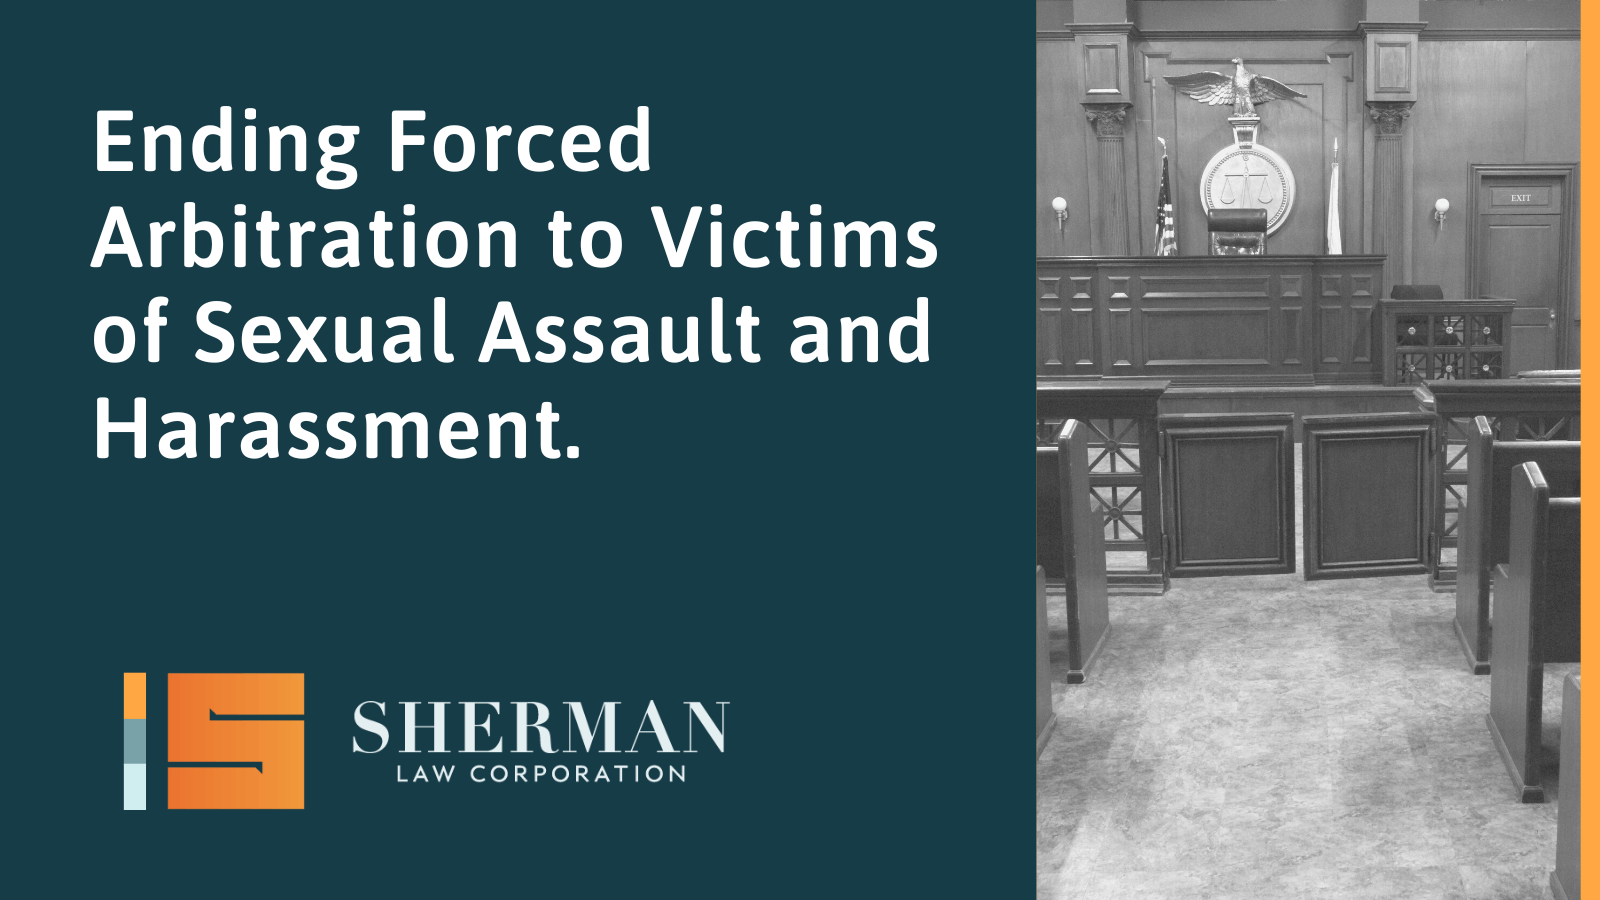 Ending Forced Arbitration to Victims of Sexual Assault and Harassment - callifornia employment law - sherman law corporation